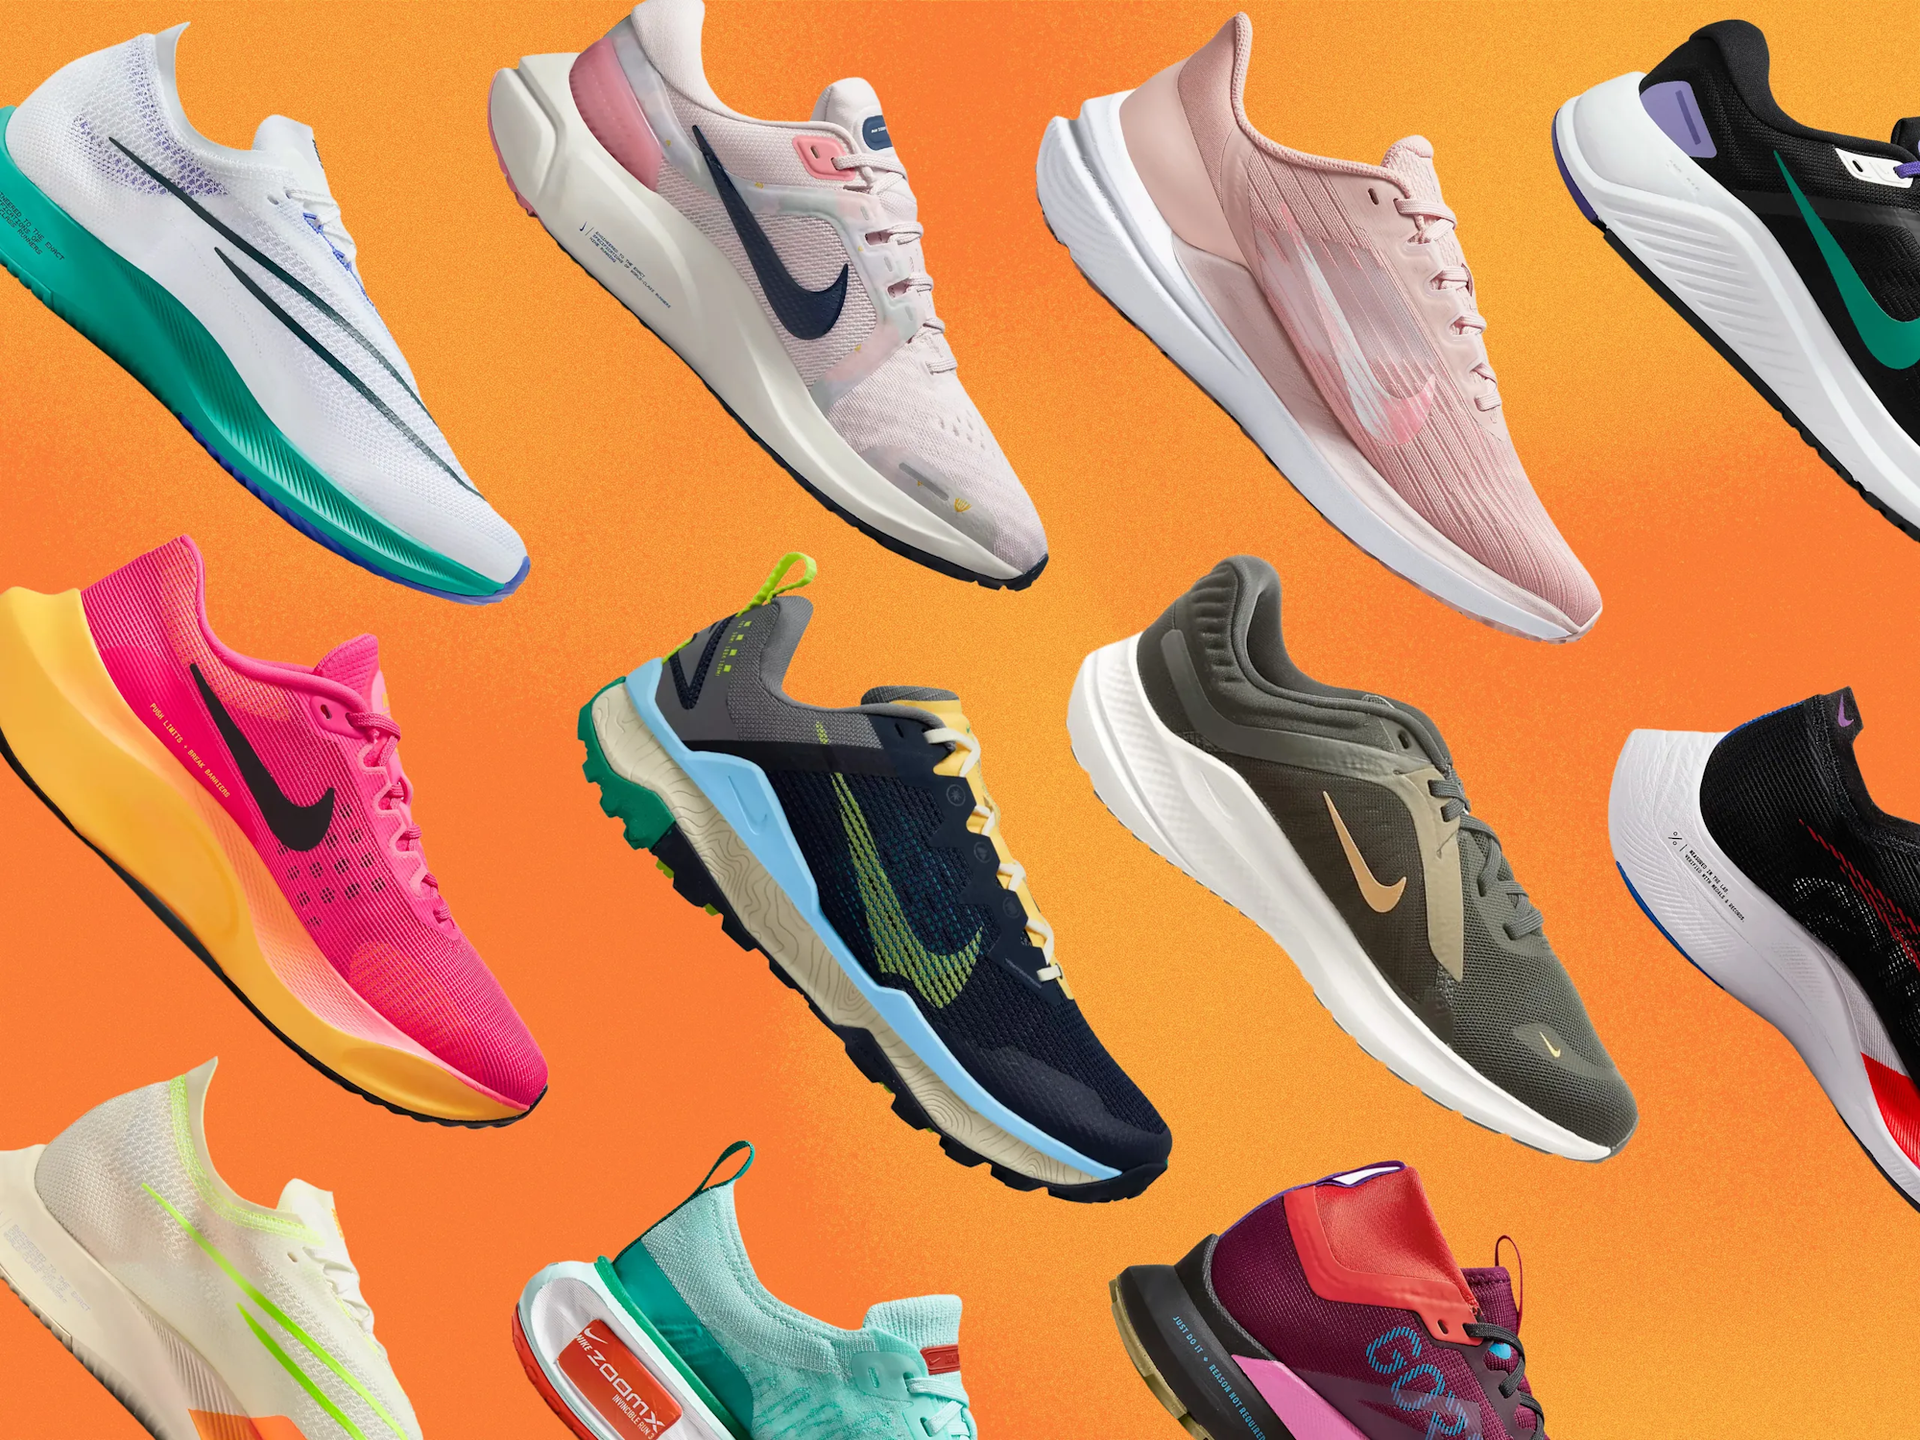 Nike Teacher Discount | Education Discount on Nike Shoes & Apparel